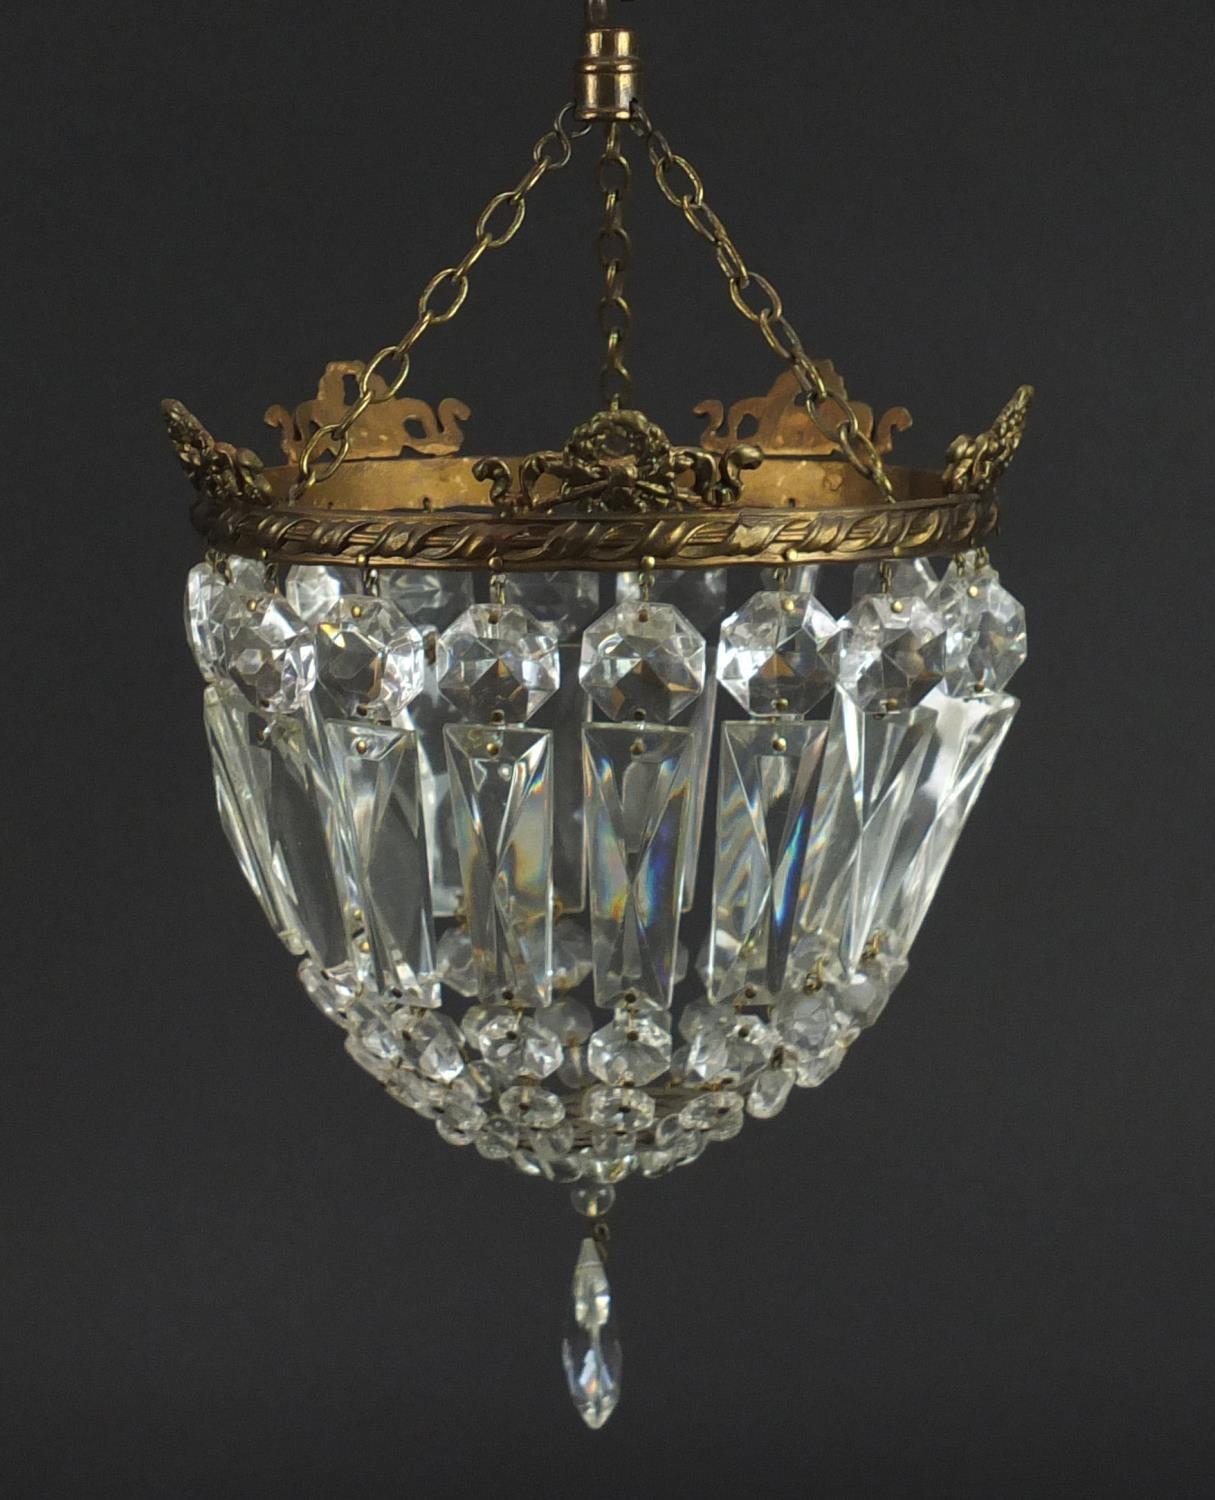 Two brass bag chandeliers with cut glass drops, the largest 20cm high x 16cm in diameter :For - Image 3 of 3